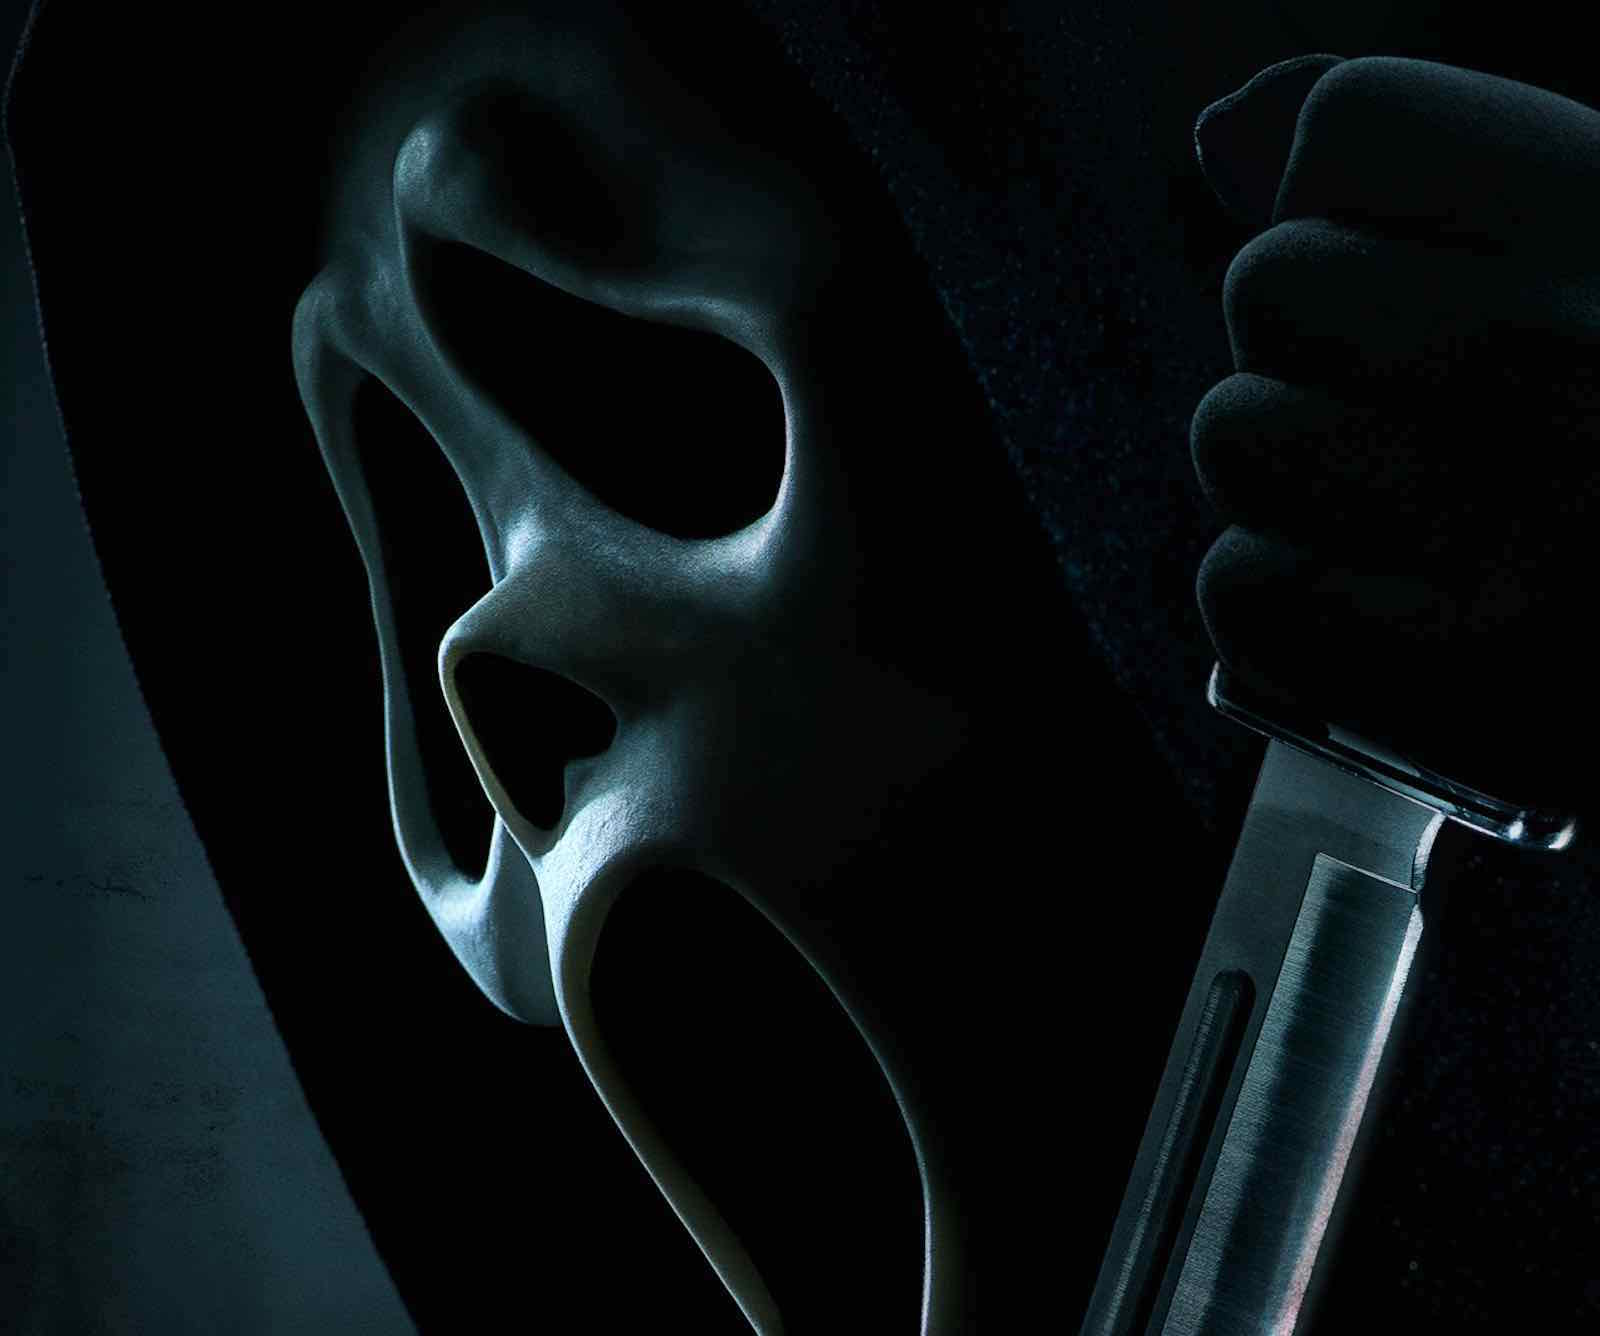 How can you watch the new slasher movie online for free?